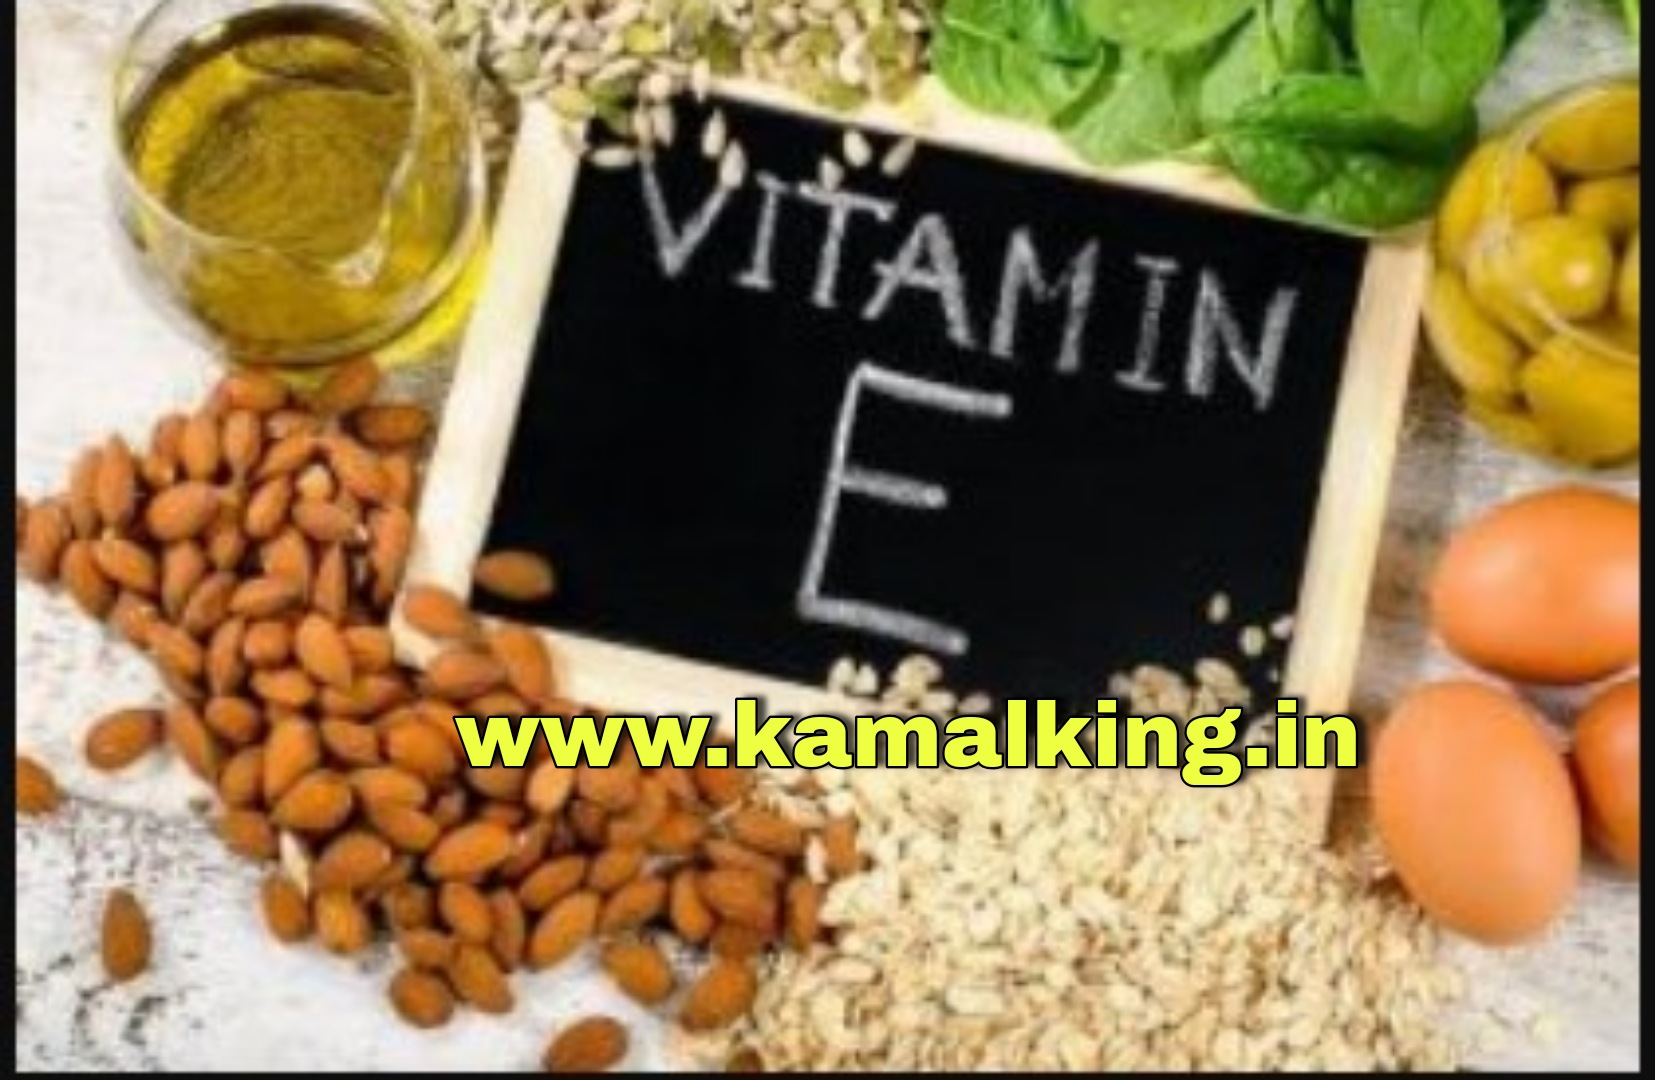 Vitamin E Sources and its Benefits